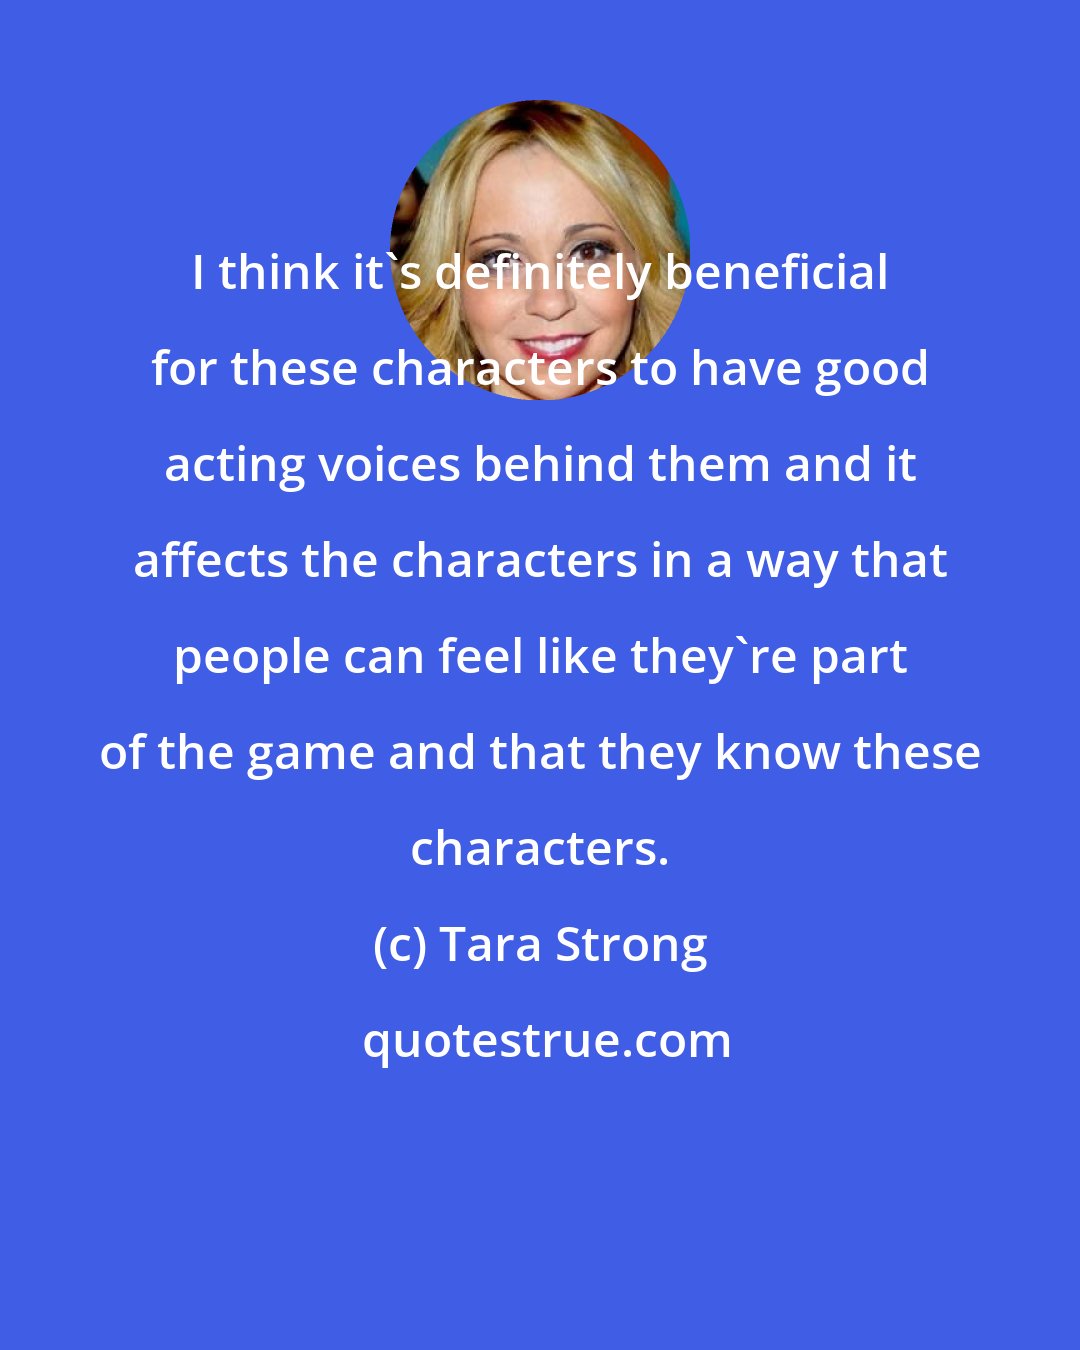 Tara Strong: I think it's definitely beneficial for these characters to have good acting voices behind them and it affects the characters in a way that people can feel like they're part of the game and that they know these characters.